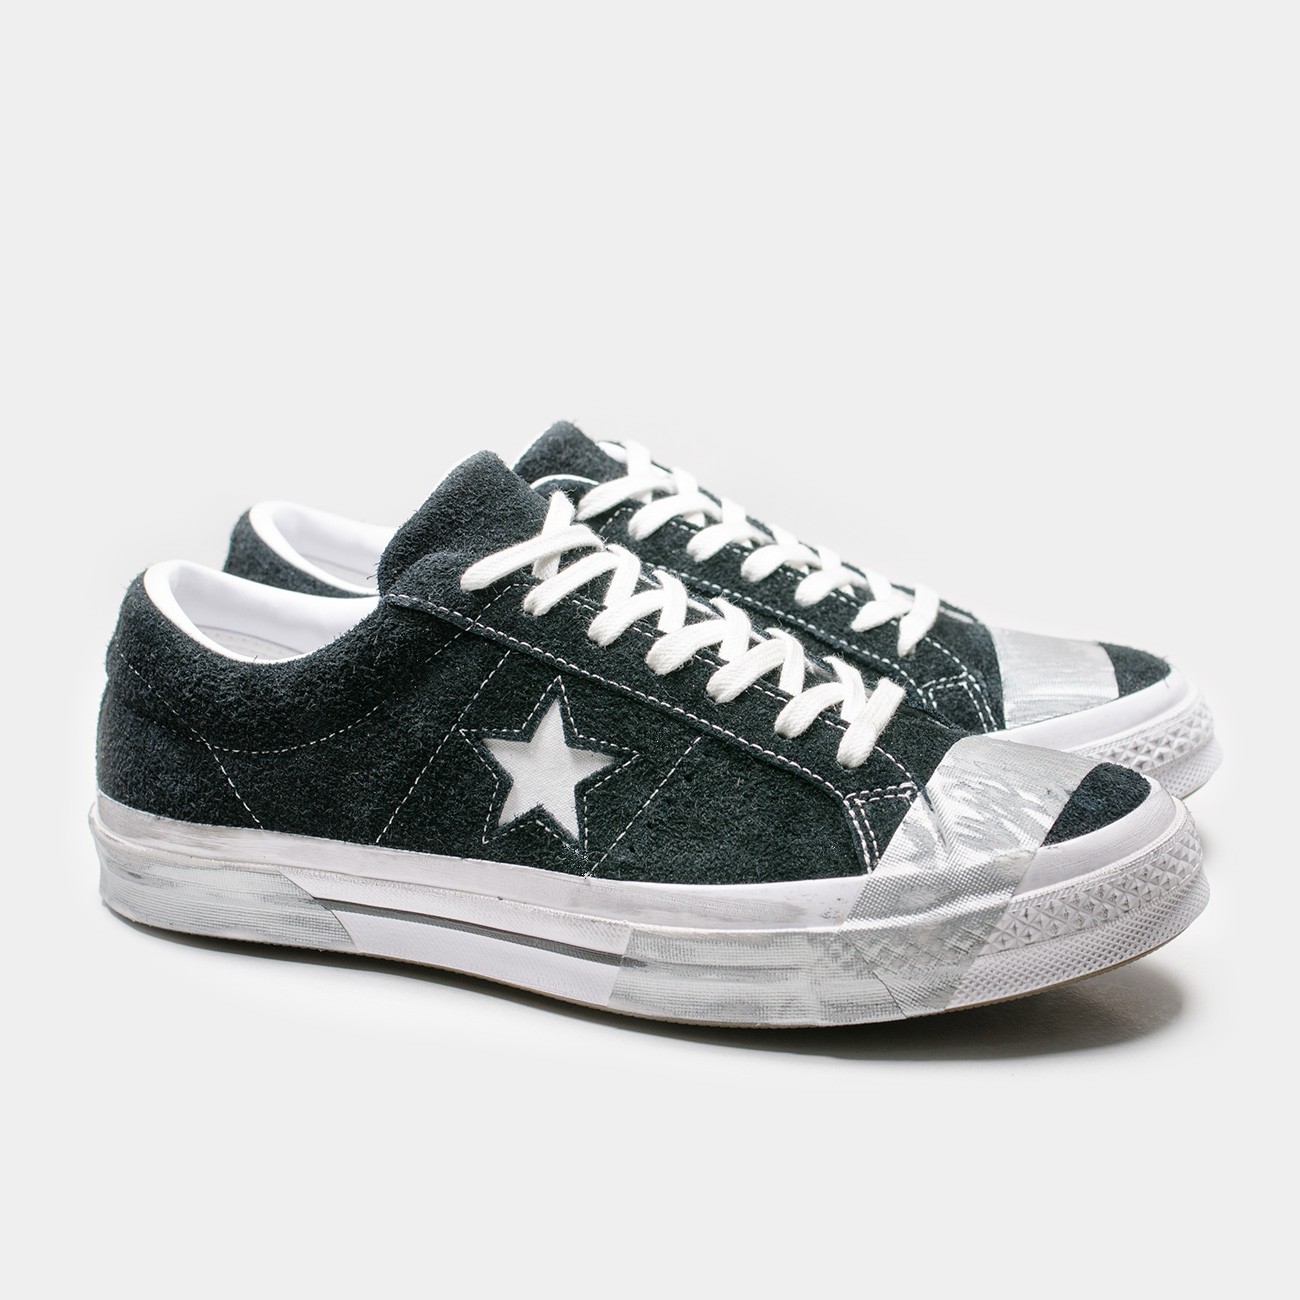 converse one star suede ox black